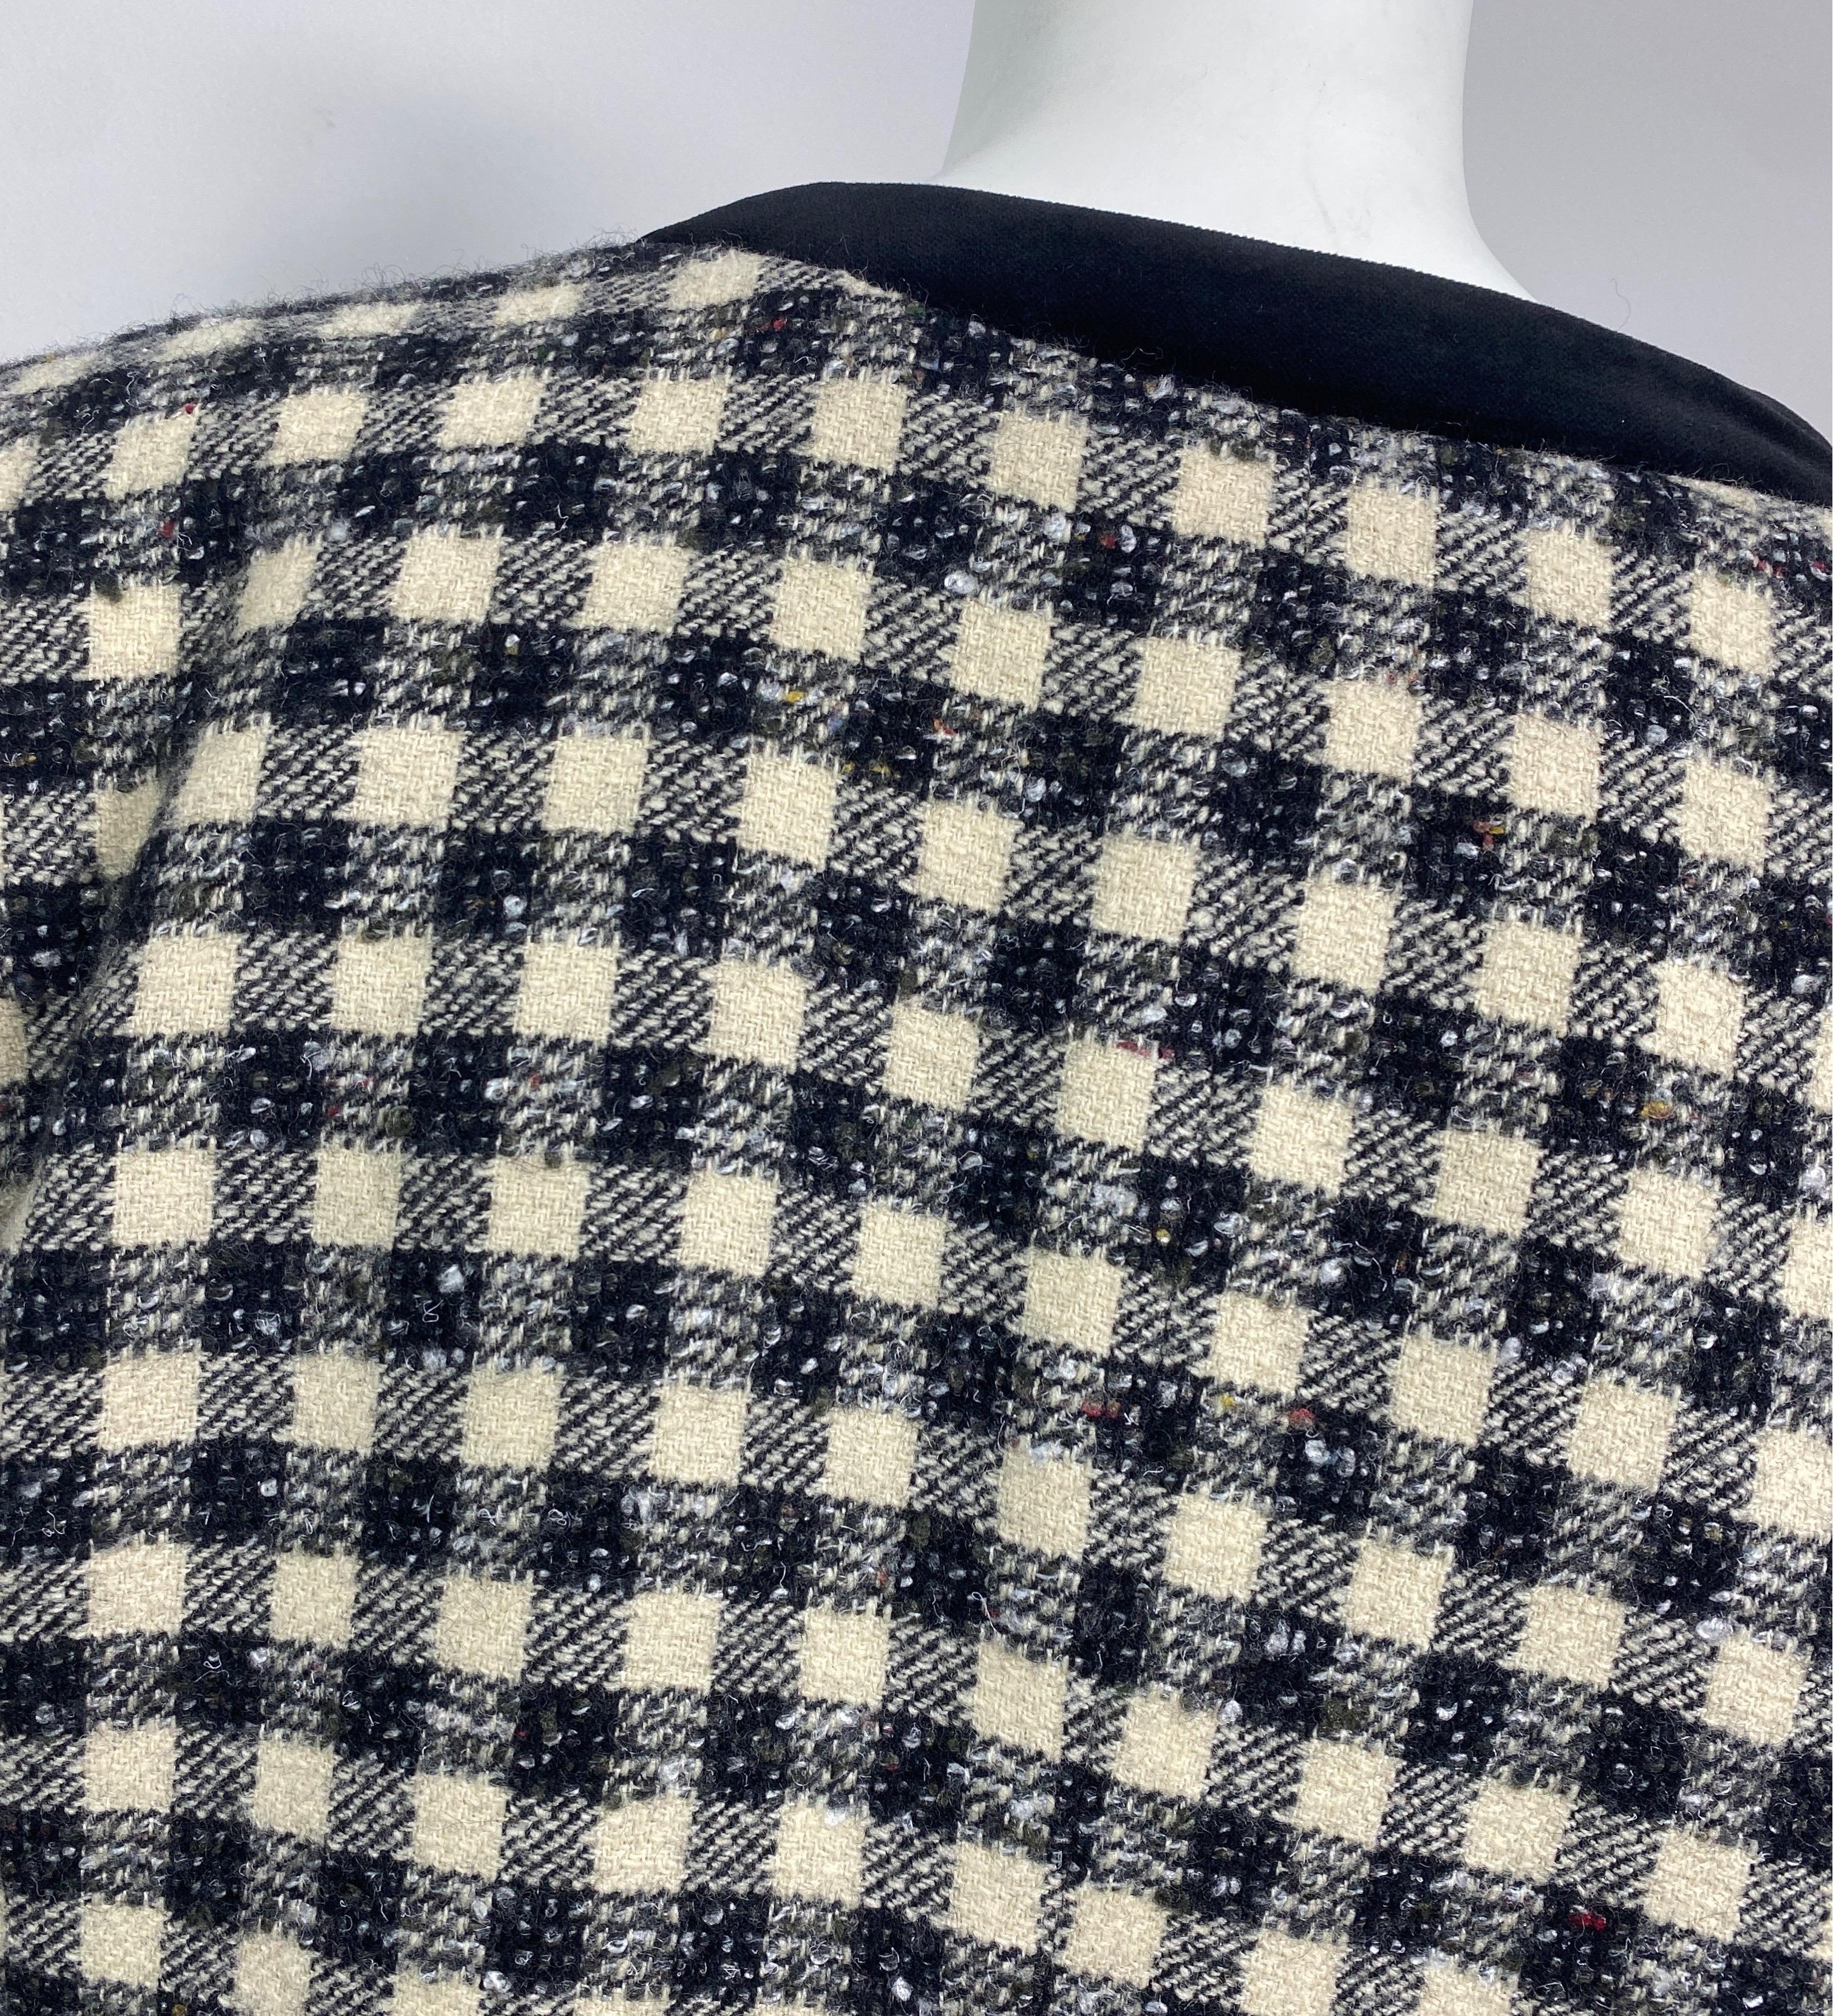 Giorgio Armani 1990’s Black and Ivory Tweed and Velvet Checkered Jacket -Size 46 For Sale 5